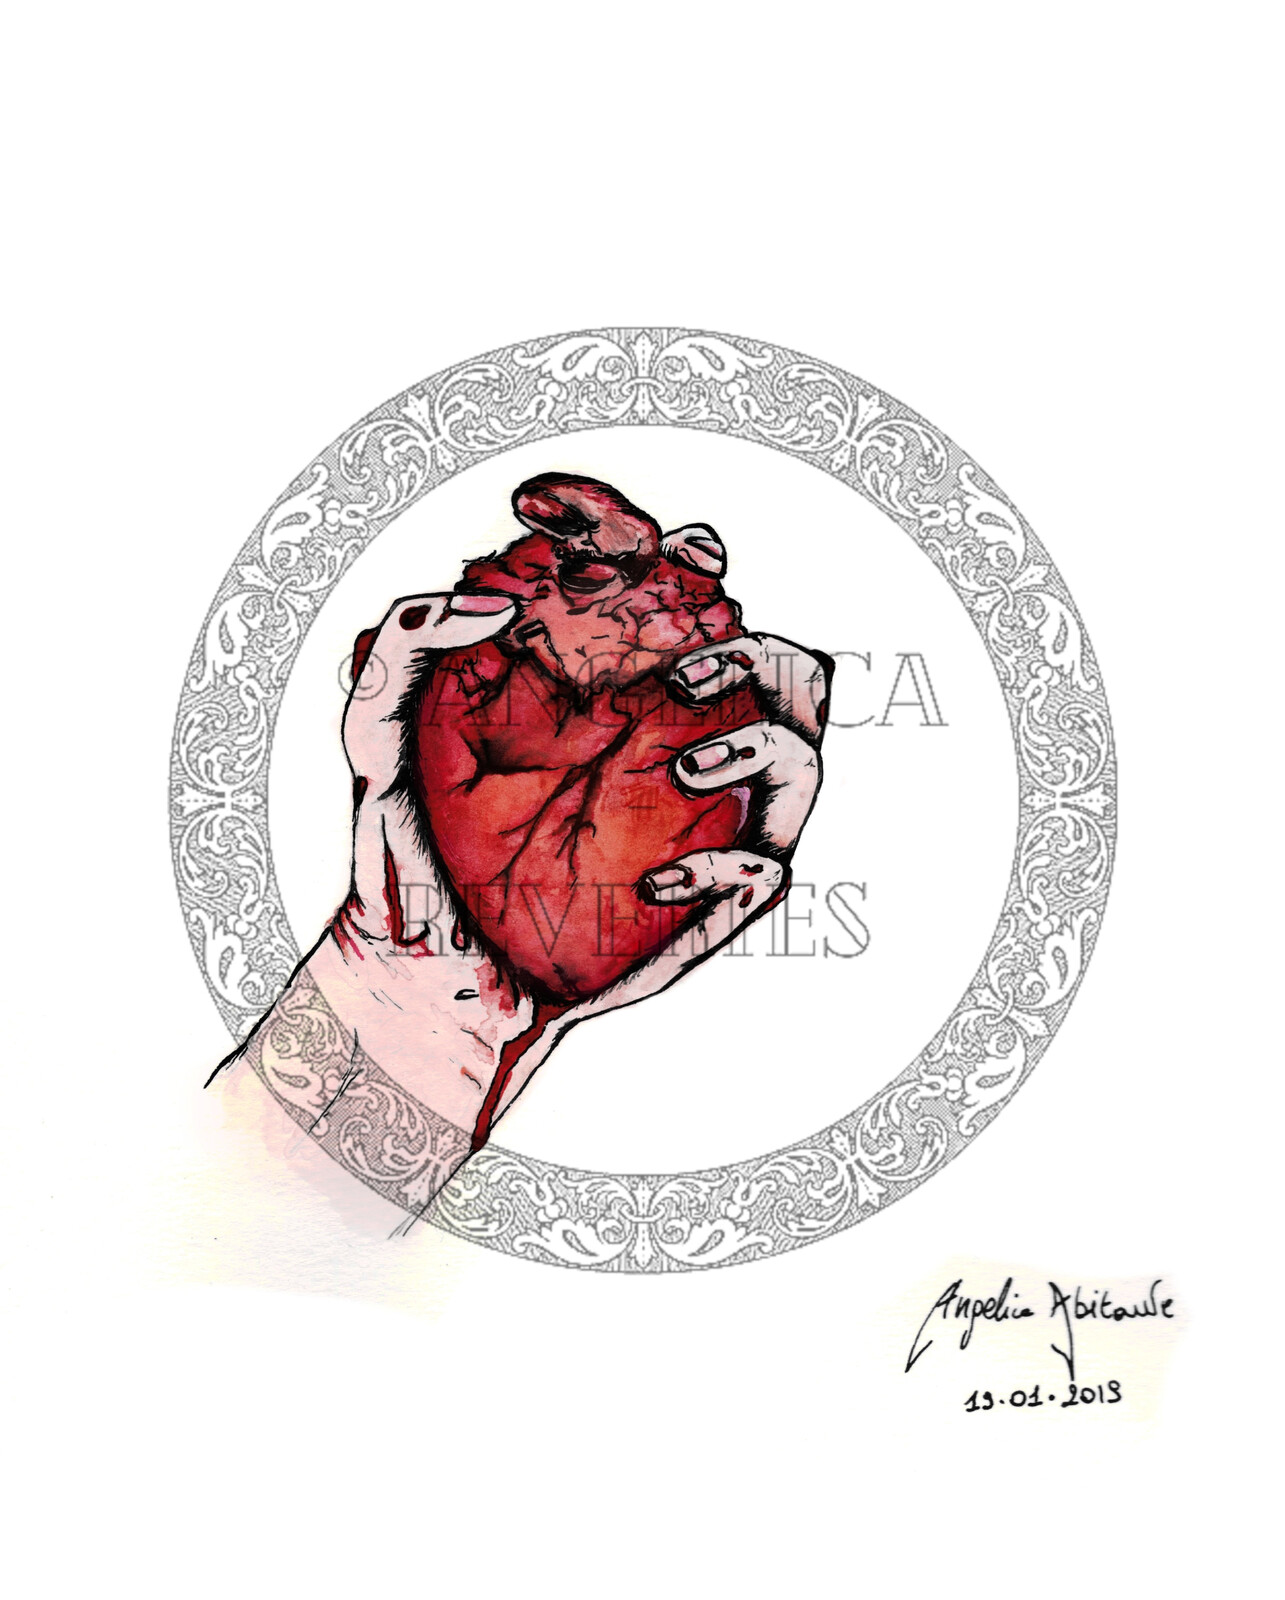 "Hold me close"
Anatomical heart study #3
Inks and watercolors.
